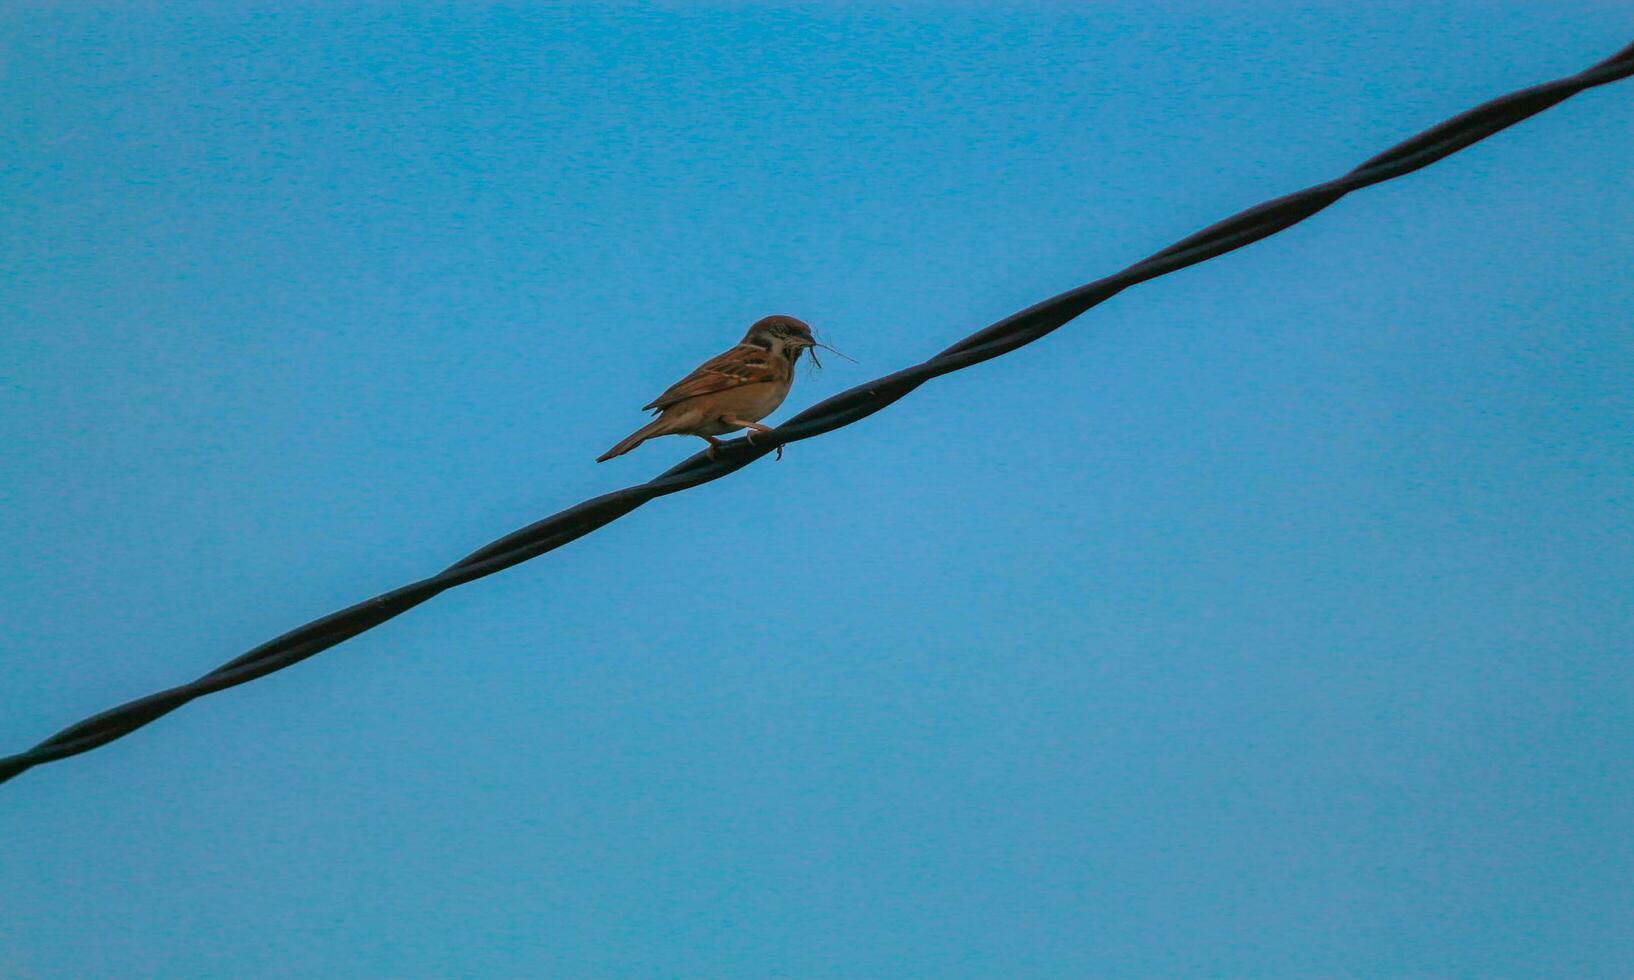 A sparrow is perched on an electric cable carrying dry grass against a blue sky photo